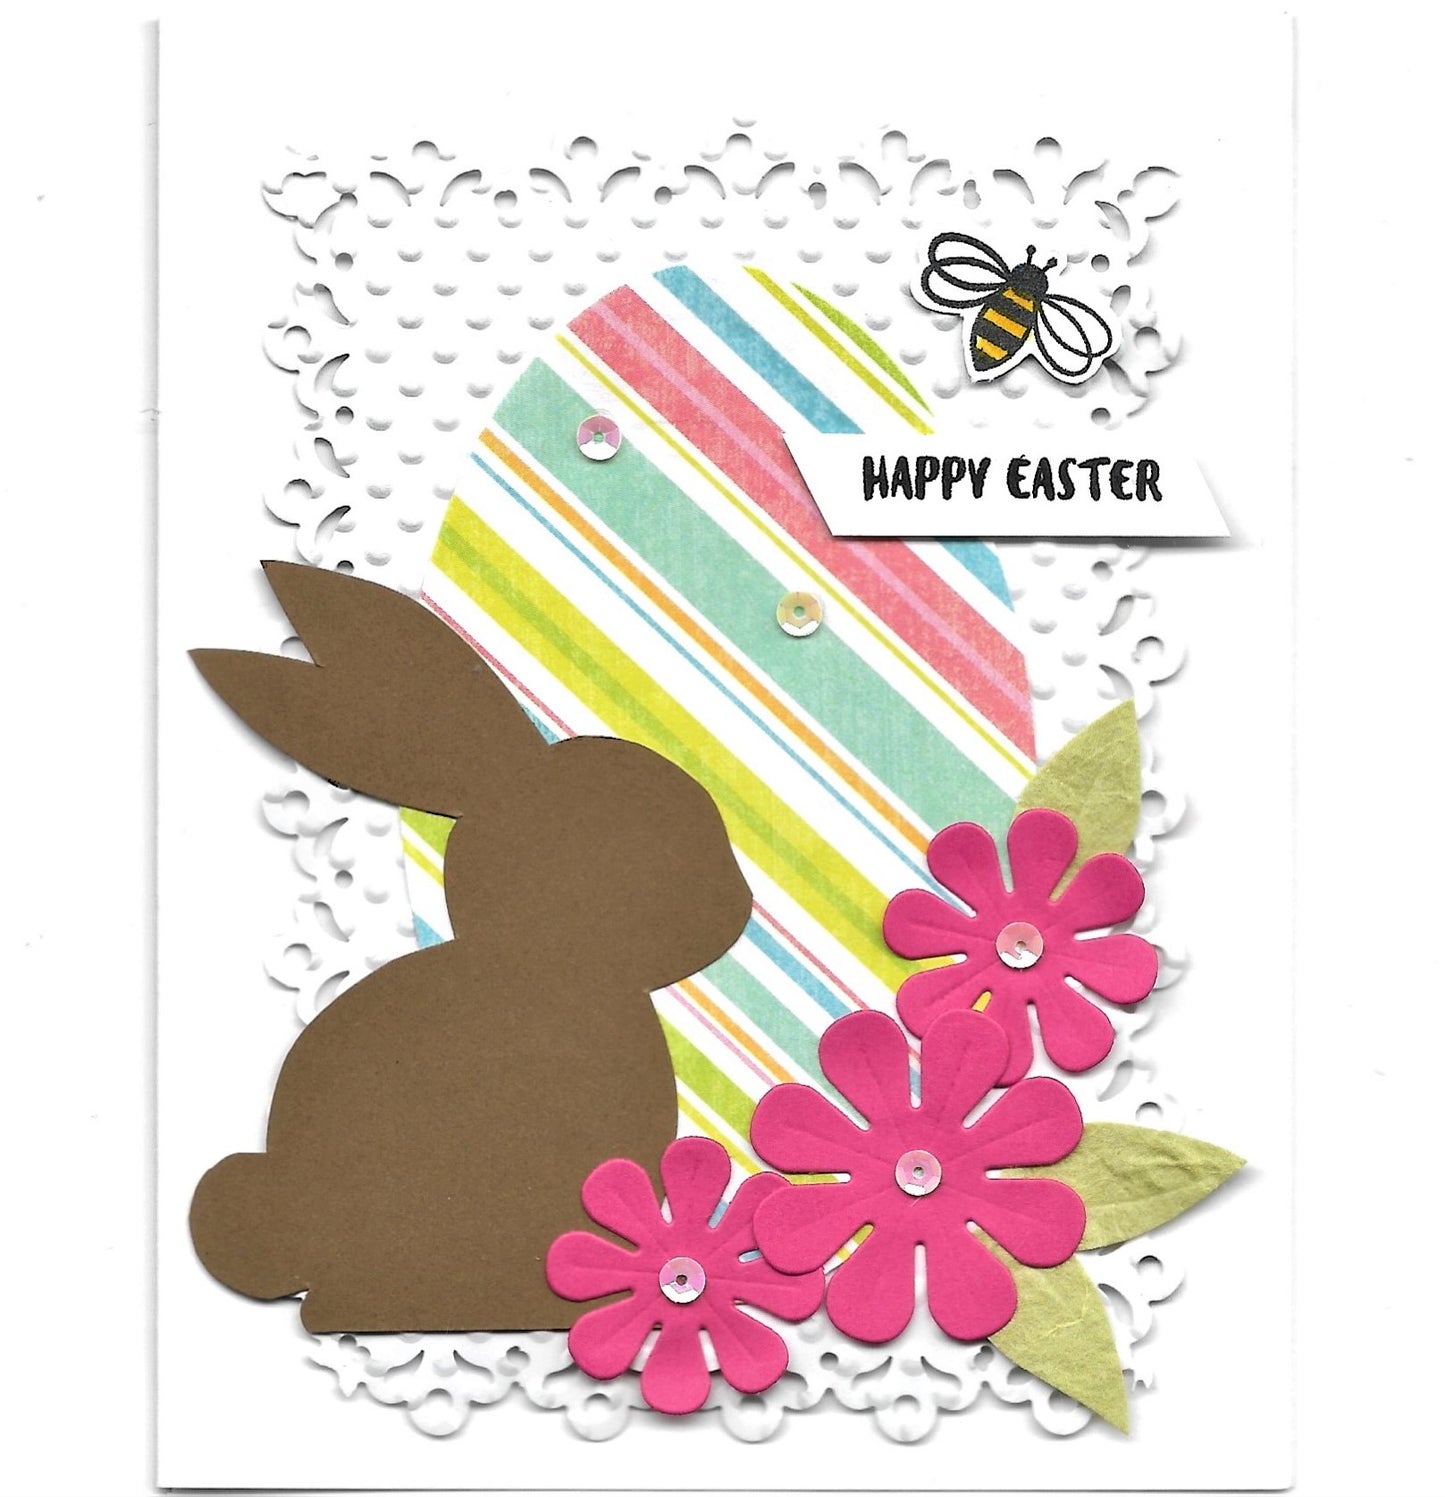 Greeting Cards, Easter